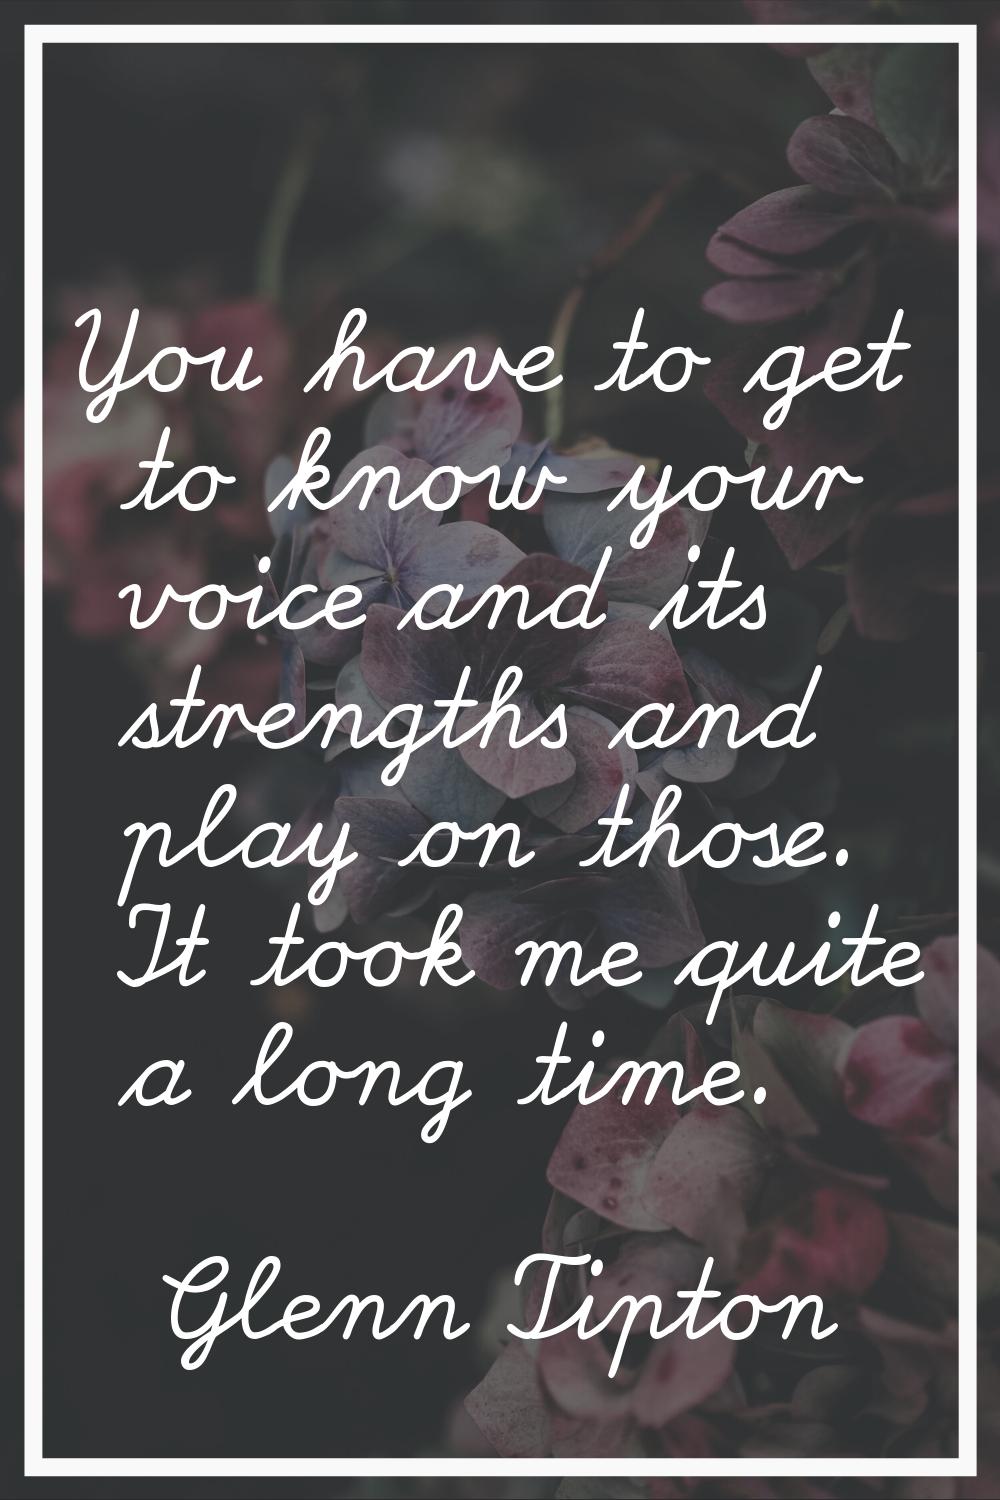 You have to get to know your voice and its strengths and play on those. It took me quite a long tim